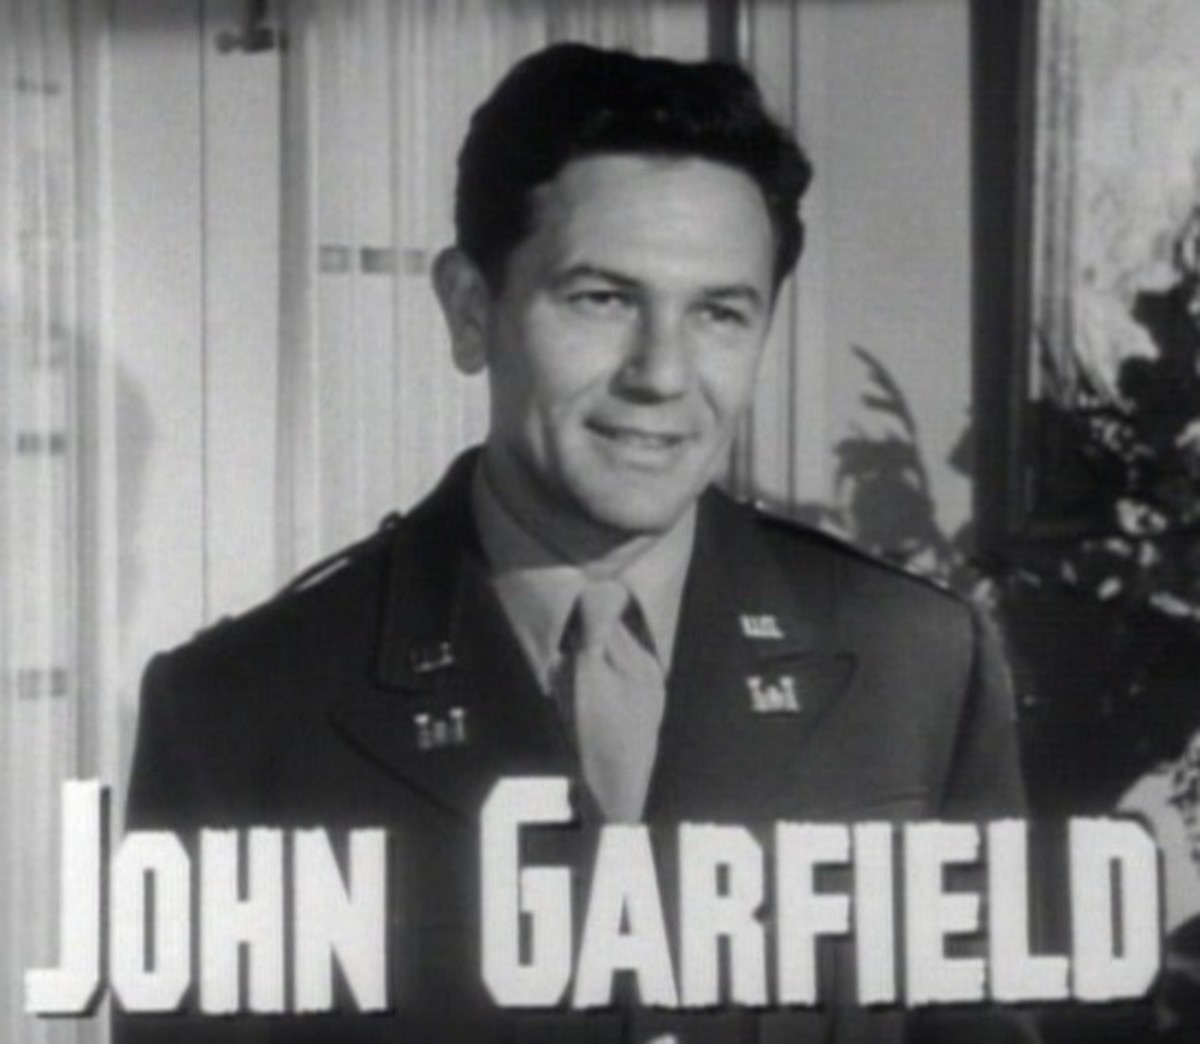 John Garfield in the trailer for "Gentleman's Agreement" (released the same year as "Body and Soul")